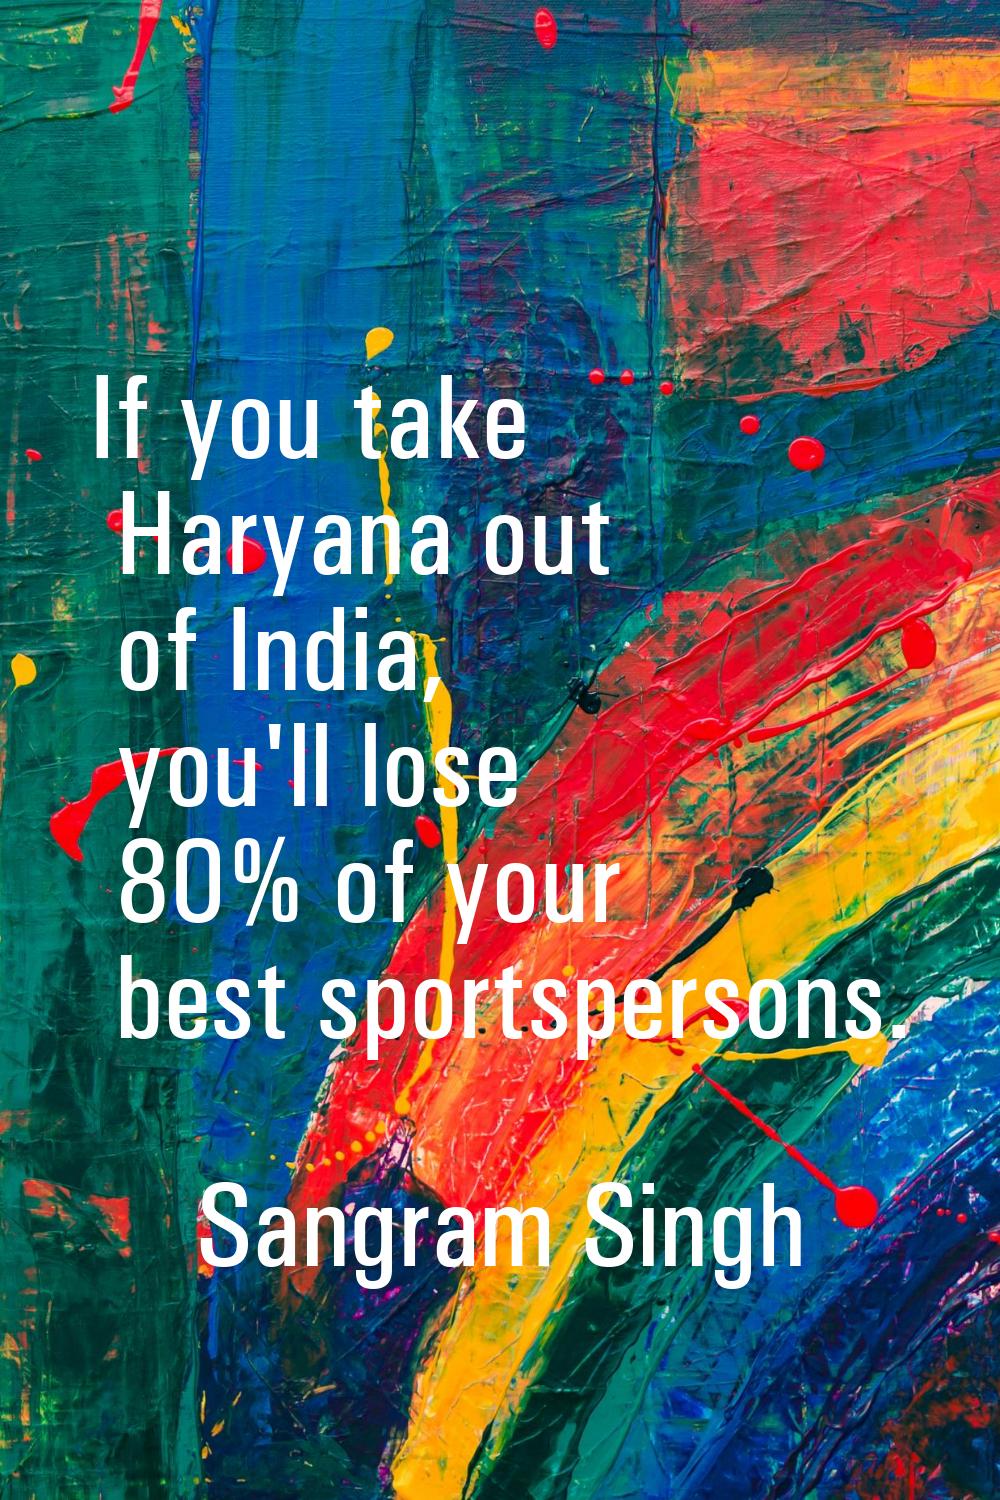 If you take Haryana out of India, you'll lose 80% of your best sportspersons.